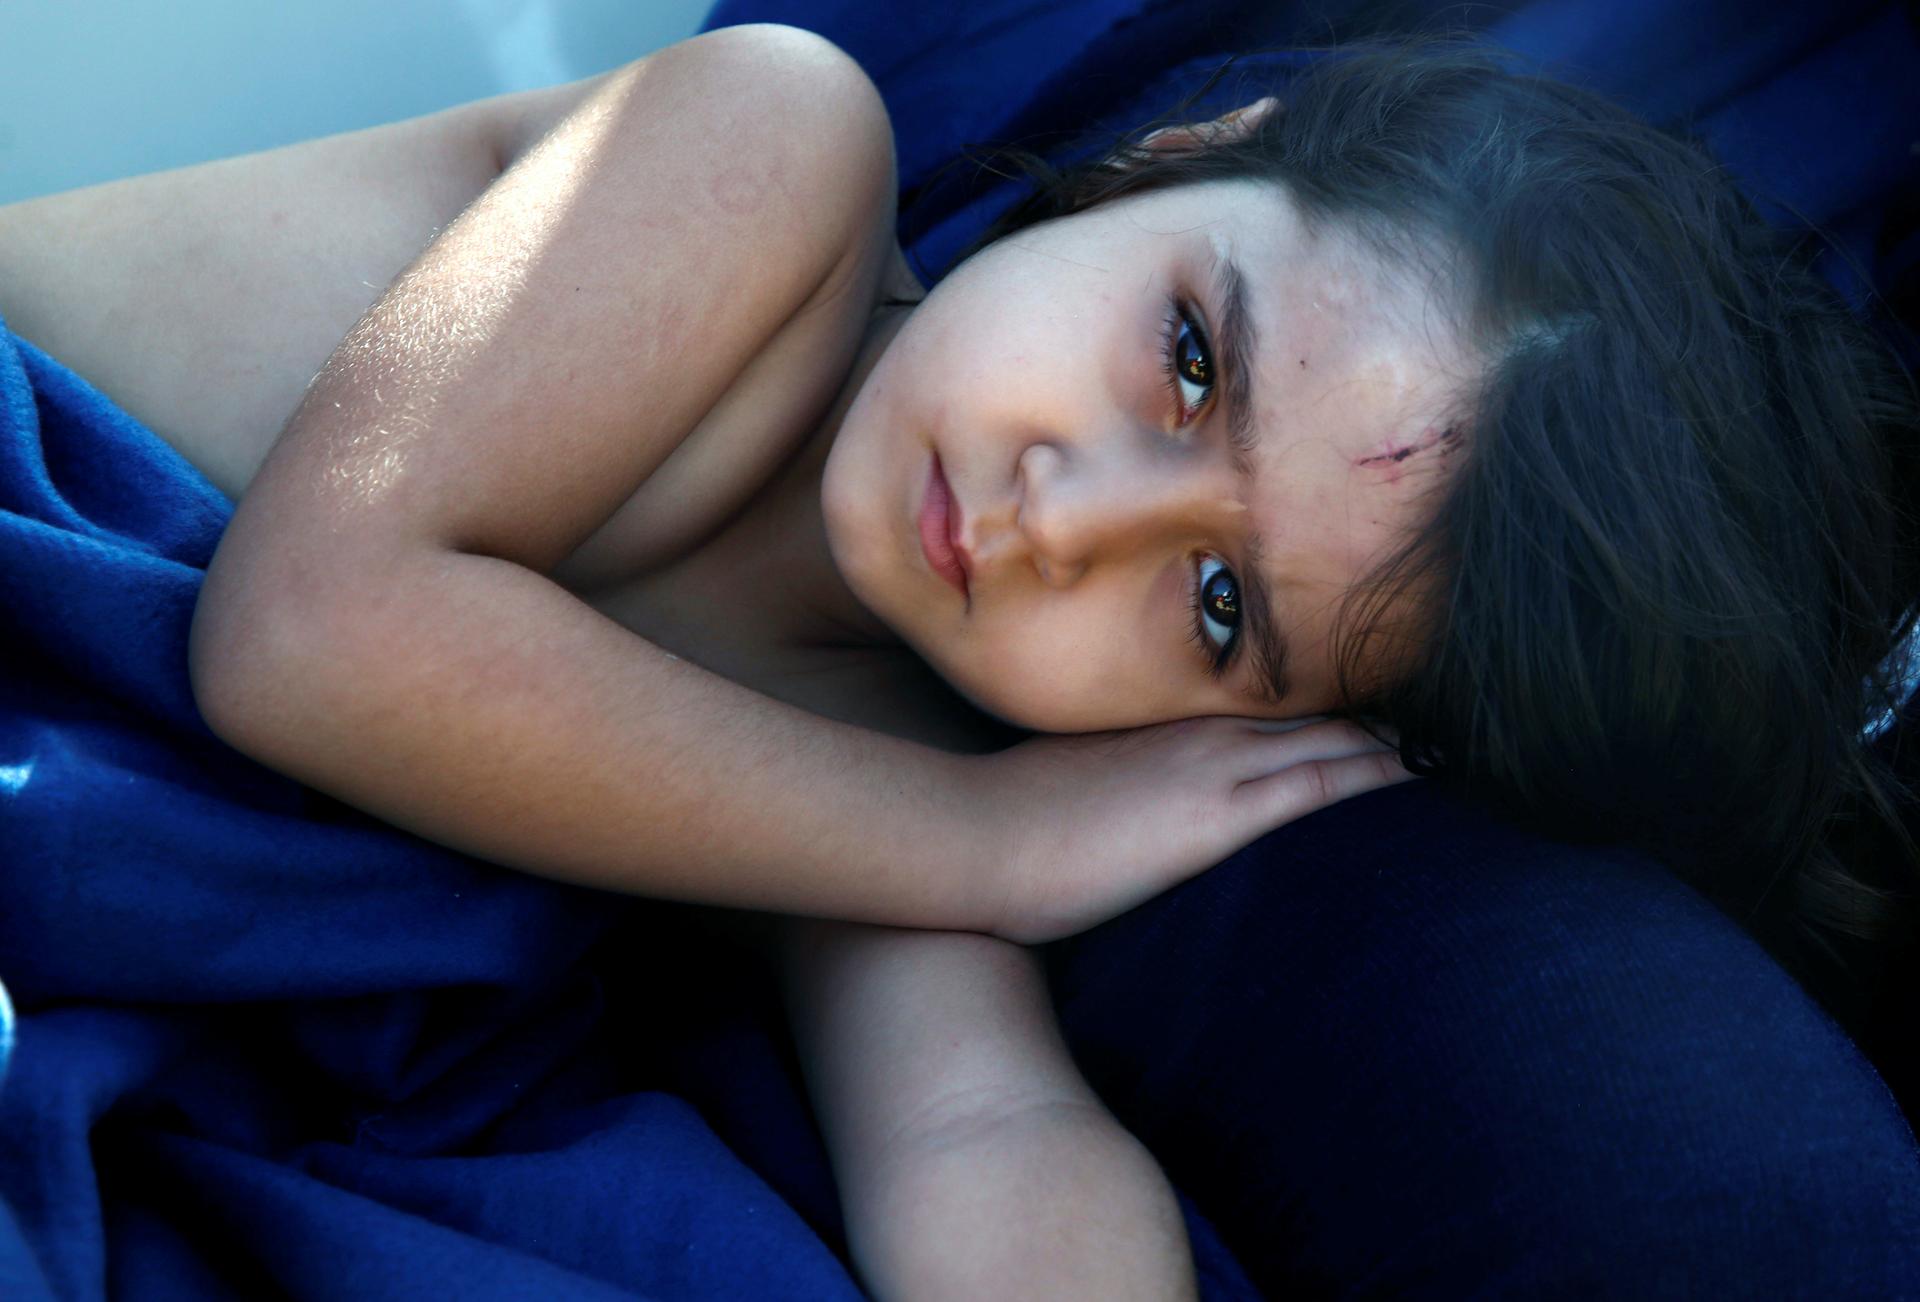 Syrian refugee girl rests inside the Spanish rescue vessel Astral after being rescued by the Spanish NGO Proactiva off the Libyan coast in the Mediterranean Sea.